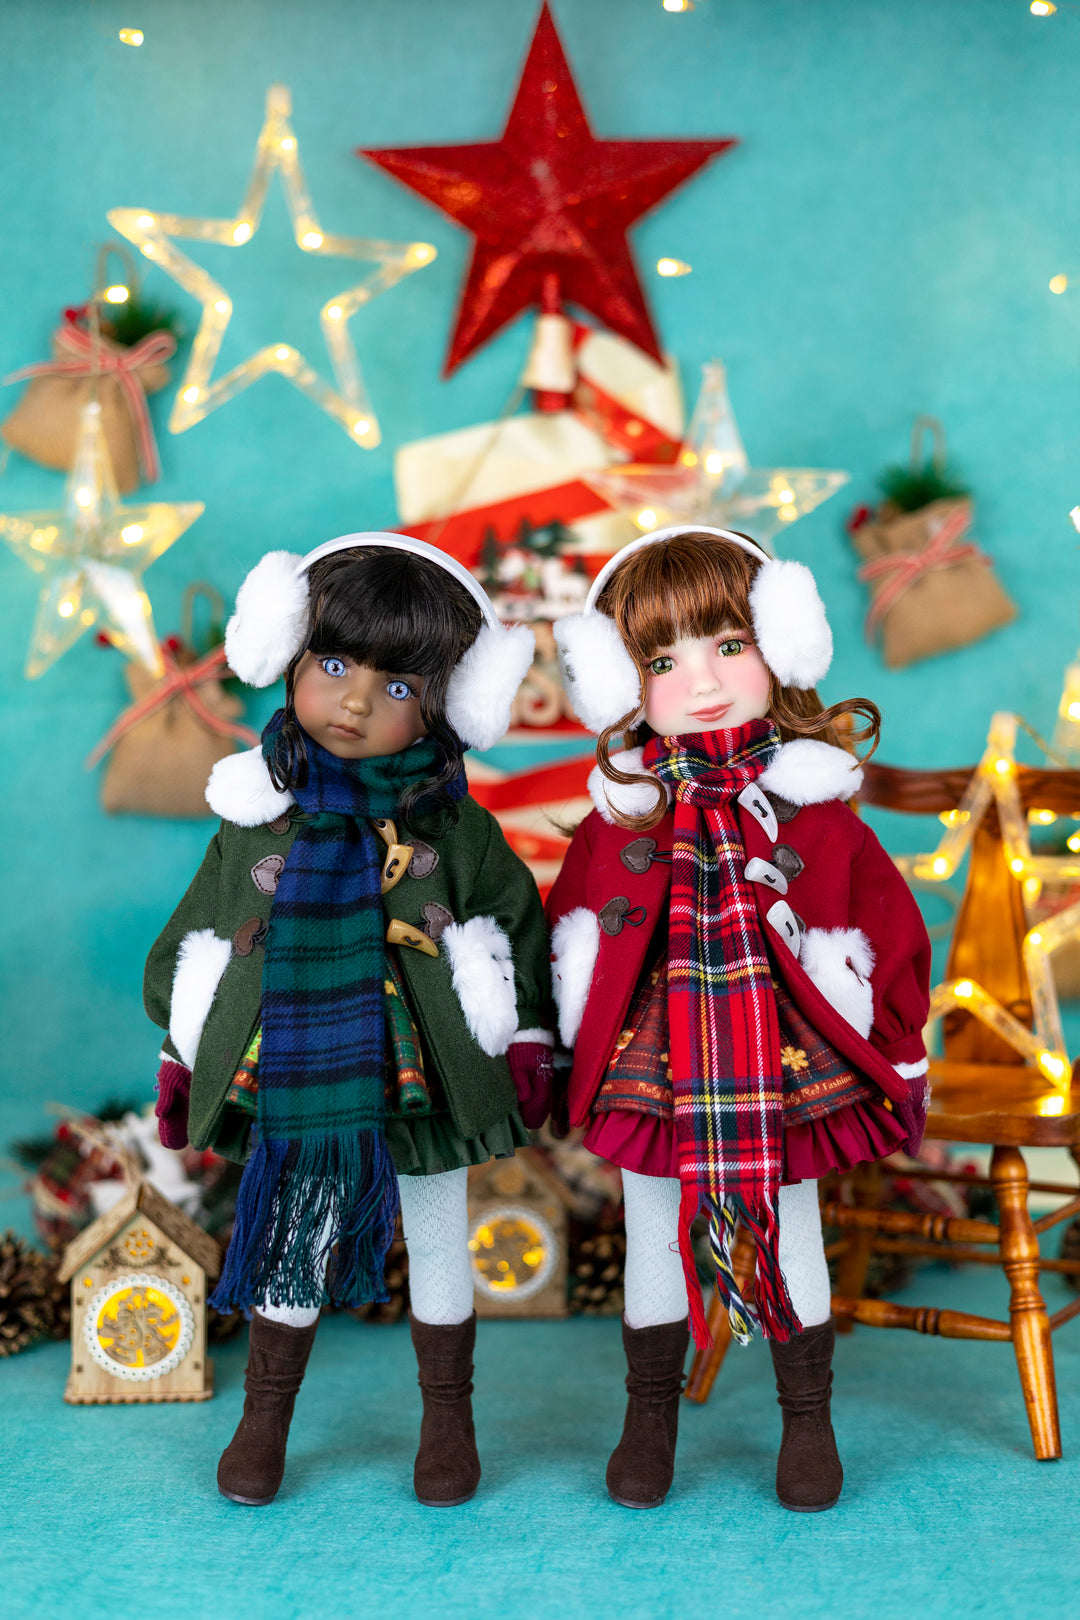 Holly 2022 Christmas Limited Edition - Ruby Red Fashion Friend doll